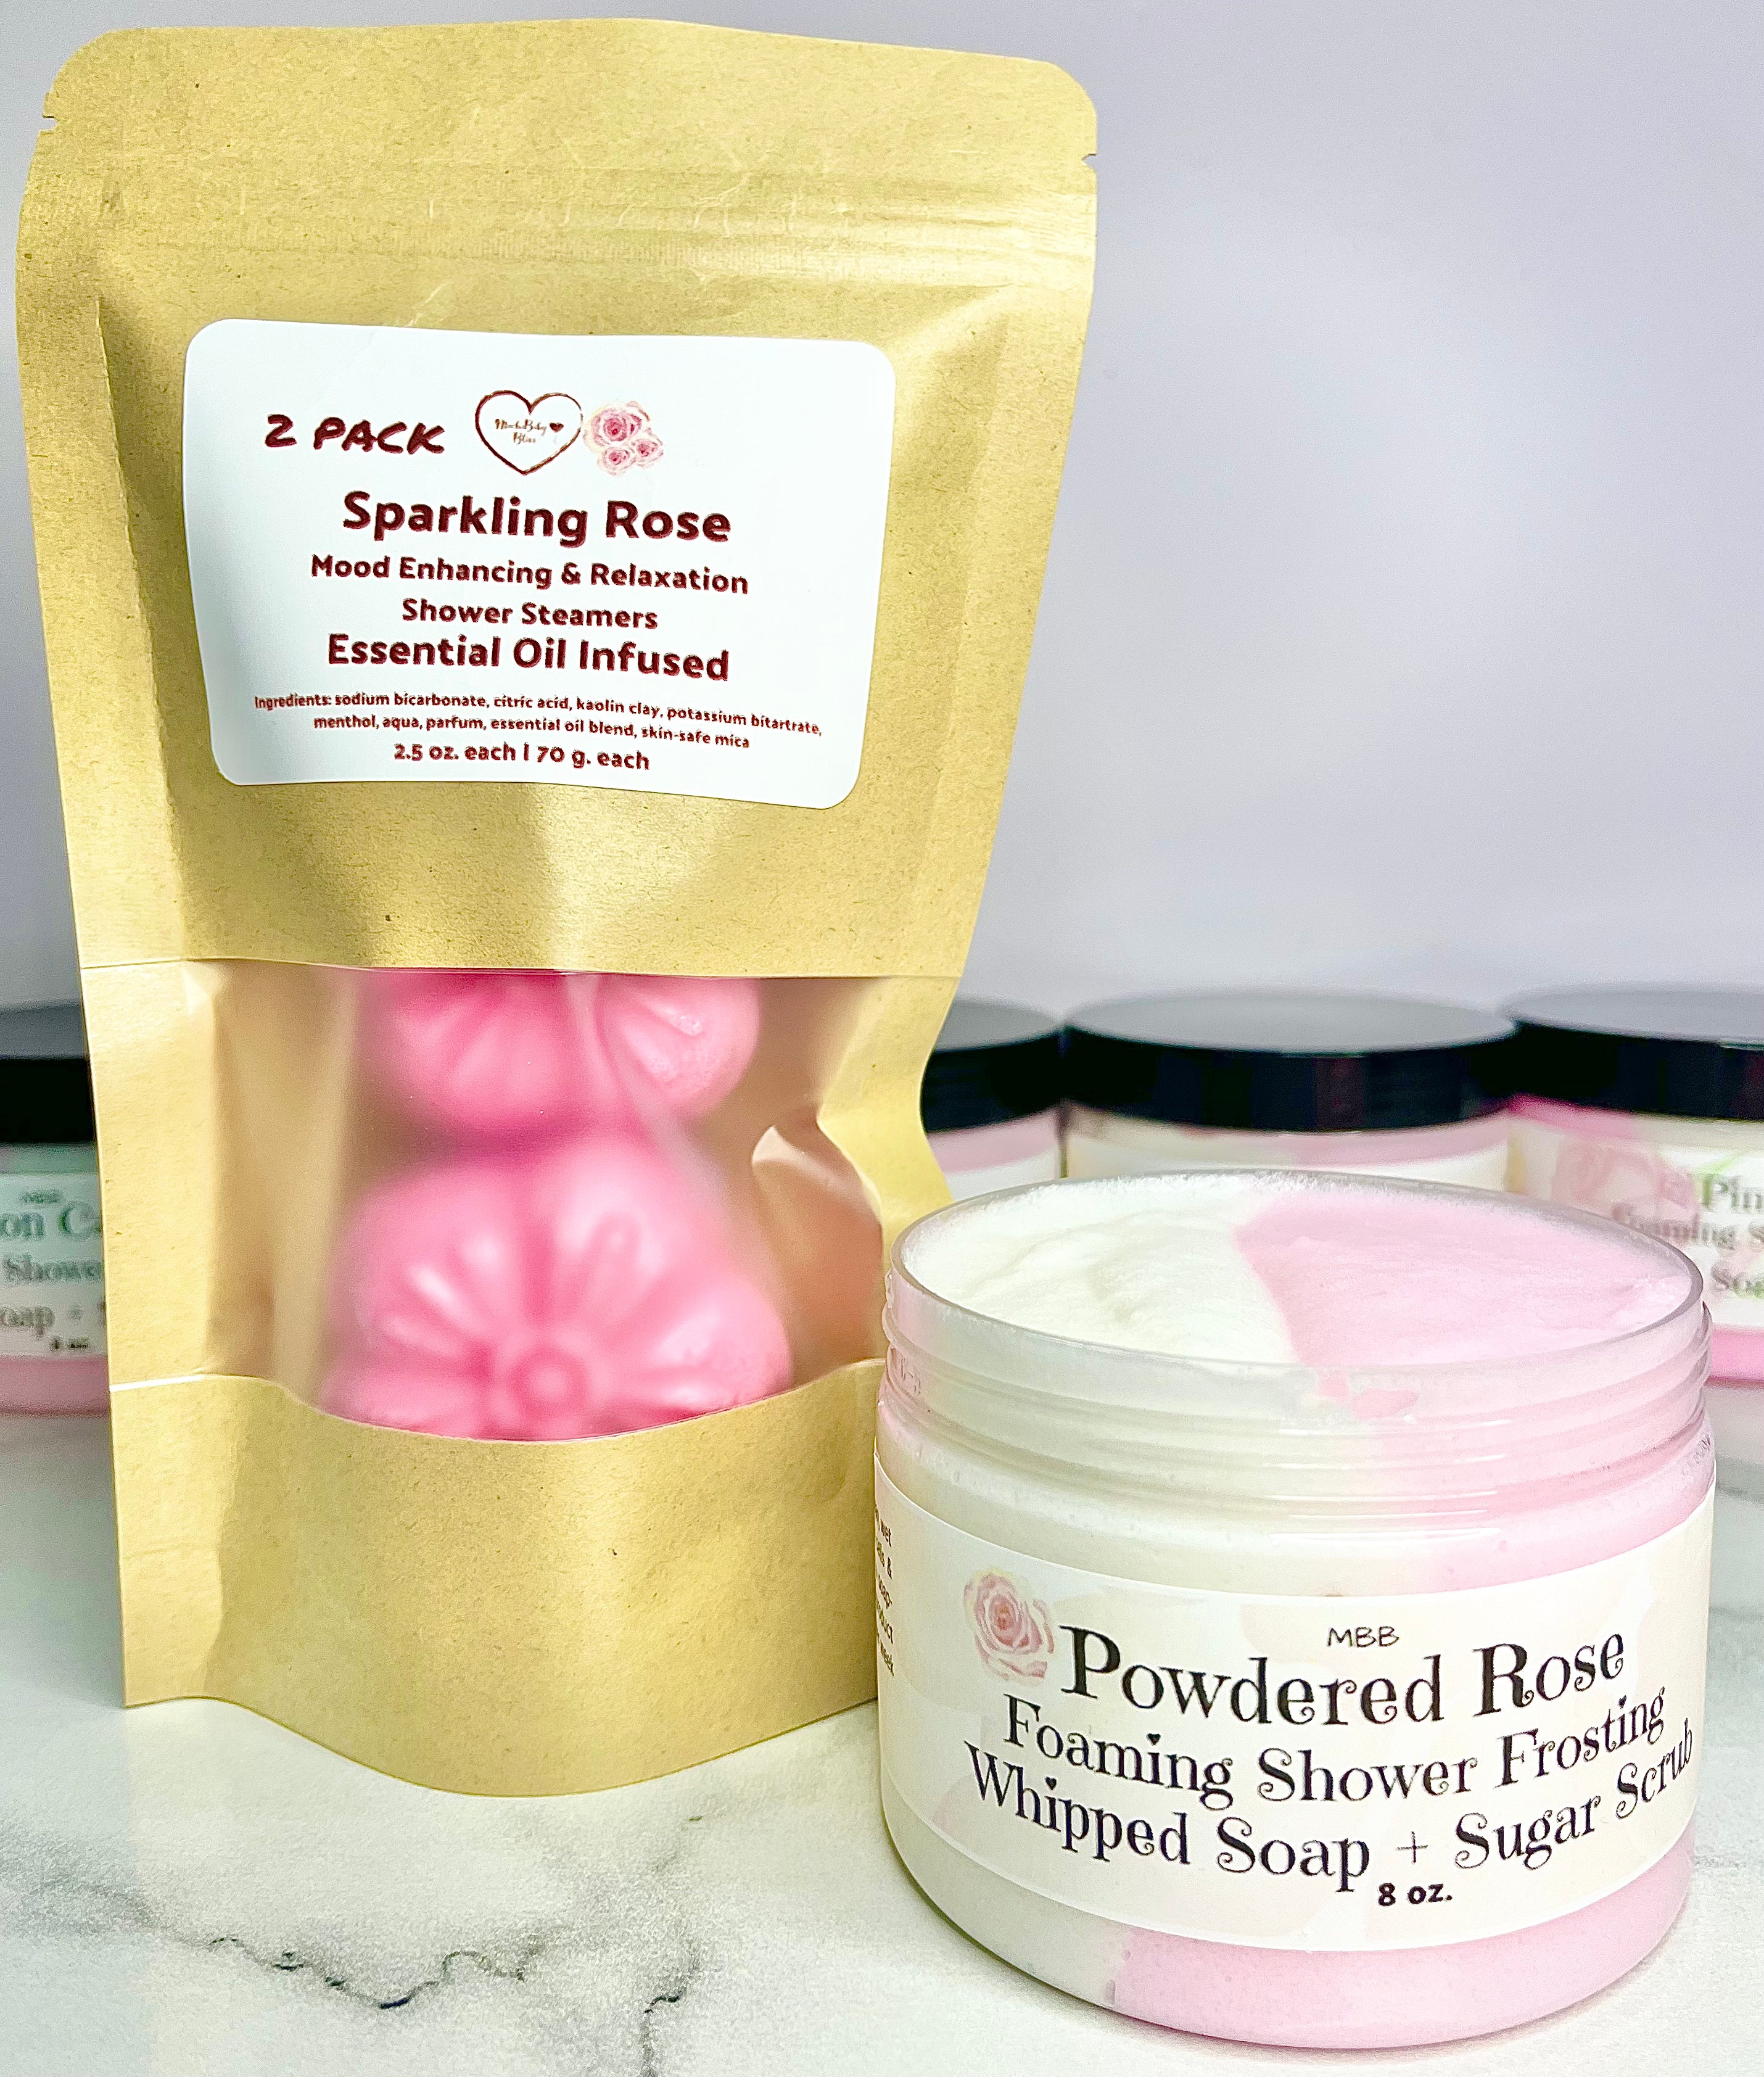 2-Pack Shower Steamers & Foaming Shower Frosting Mini Rose Spa Bundle | Sparkling Rose Steamers | Foaming Whipped Soap Sugar Scrub